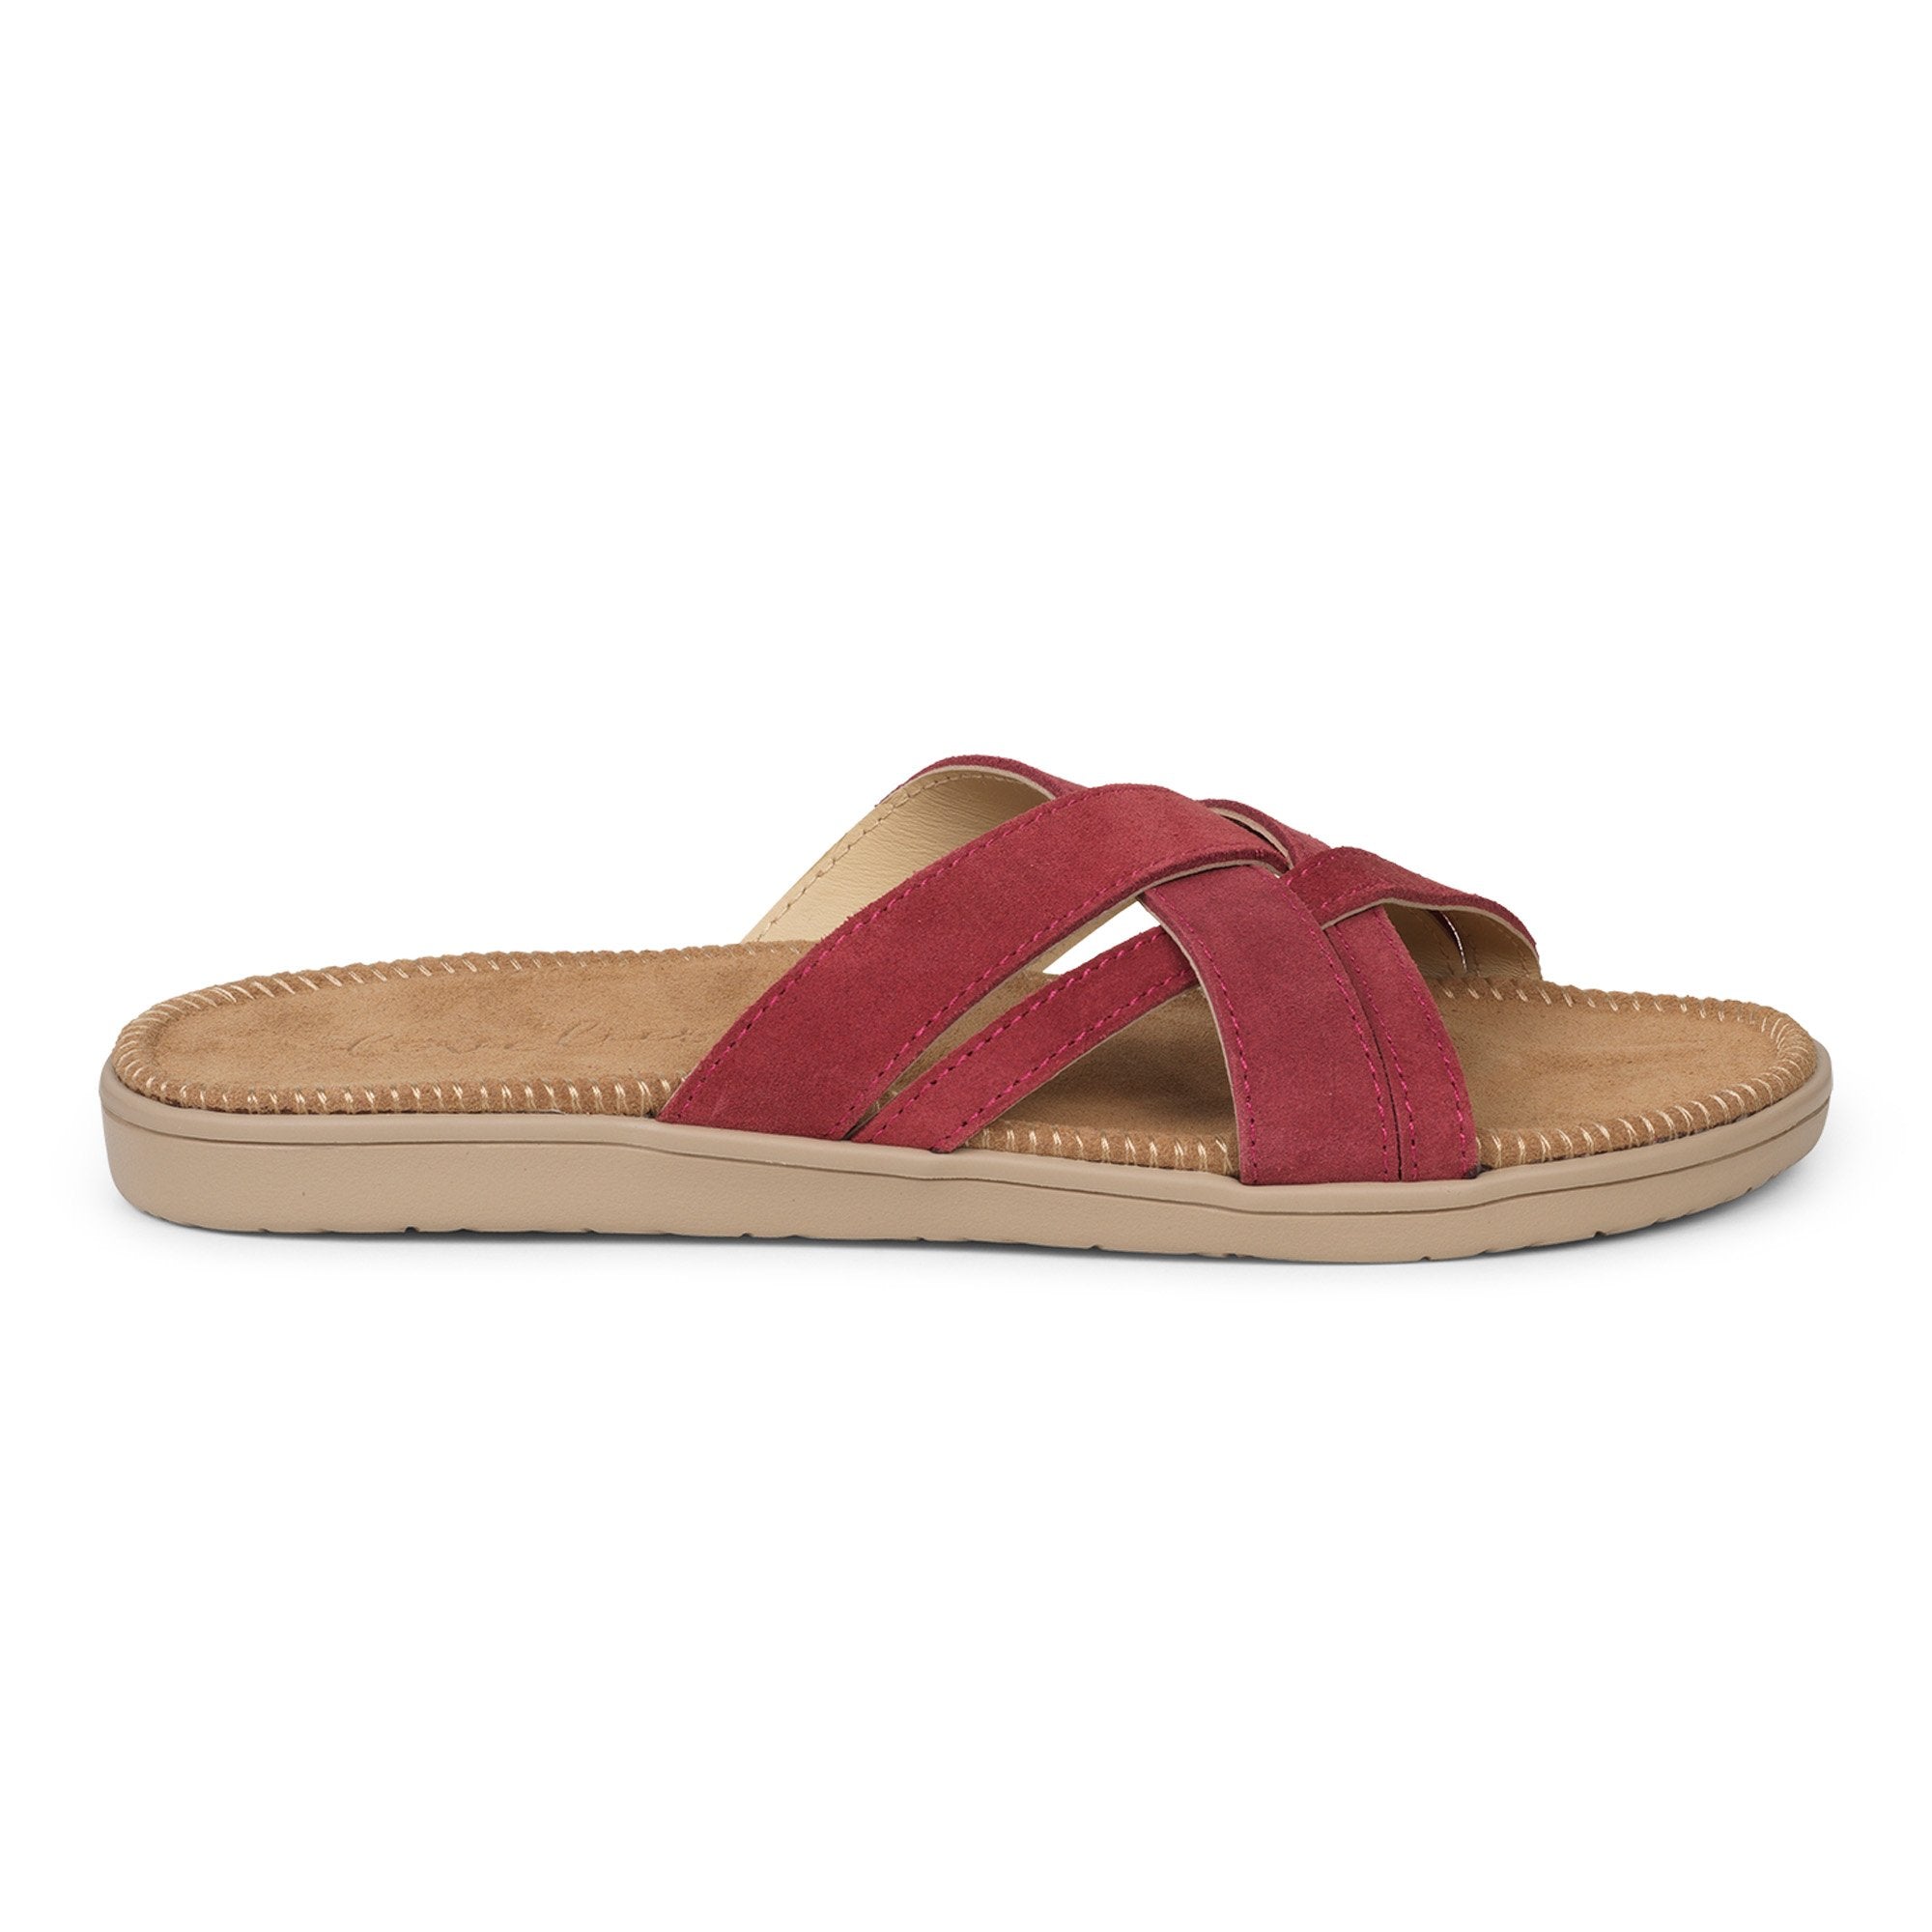 Sandals with 4 crossing straps of soft suede. The comfortable inner sole in covered with soft suede.